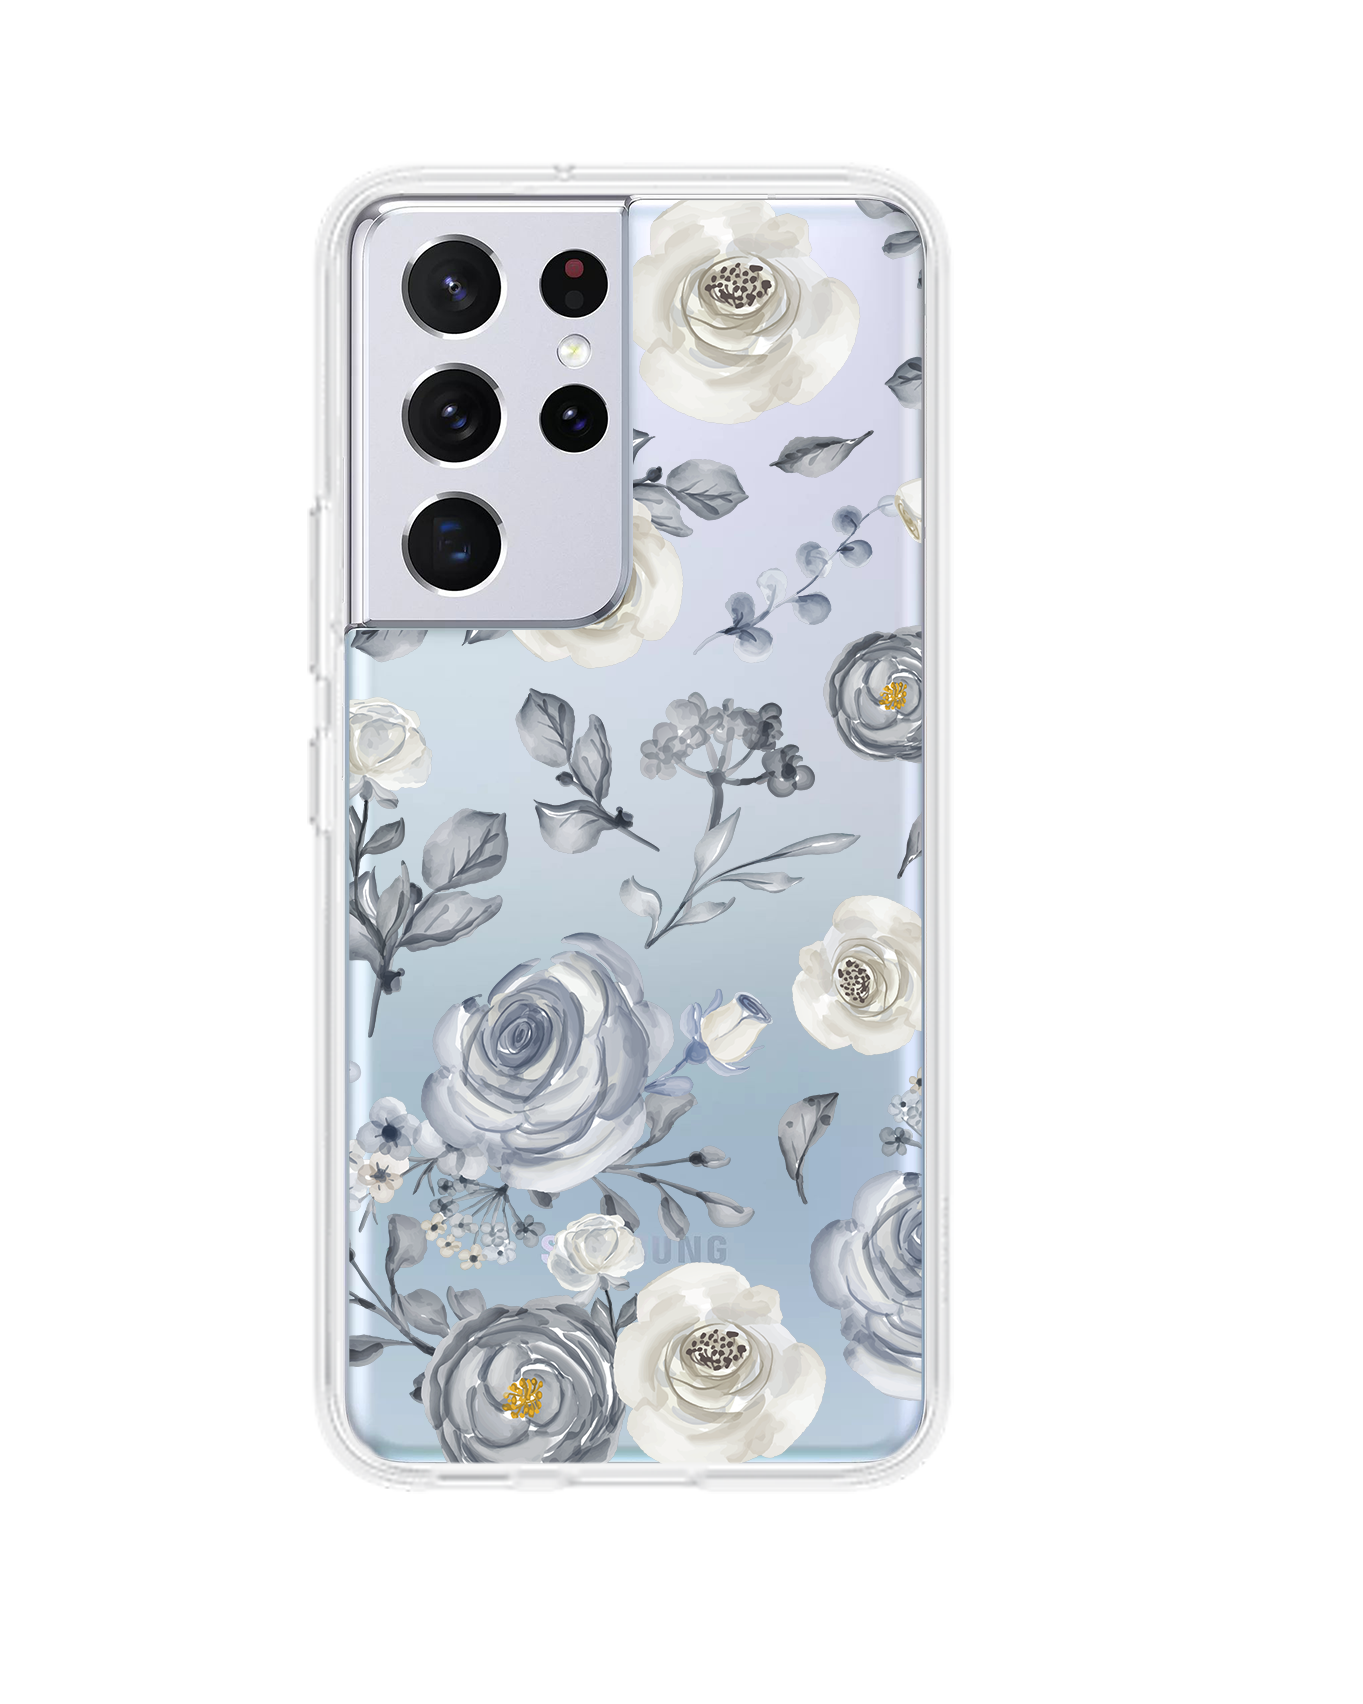 Android Rearguard Hybrid Case - Blue Rose